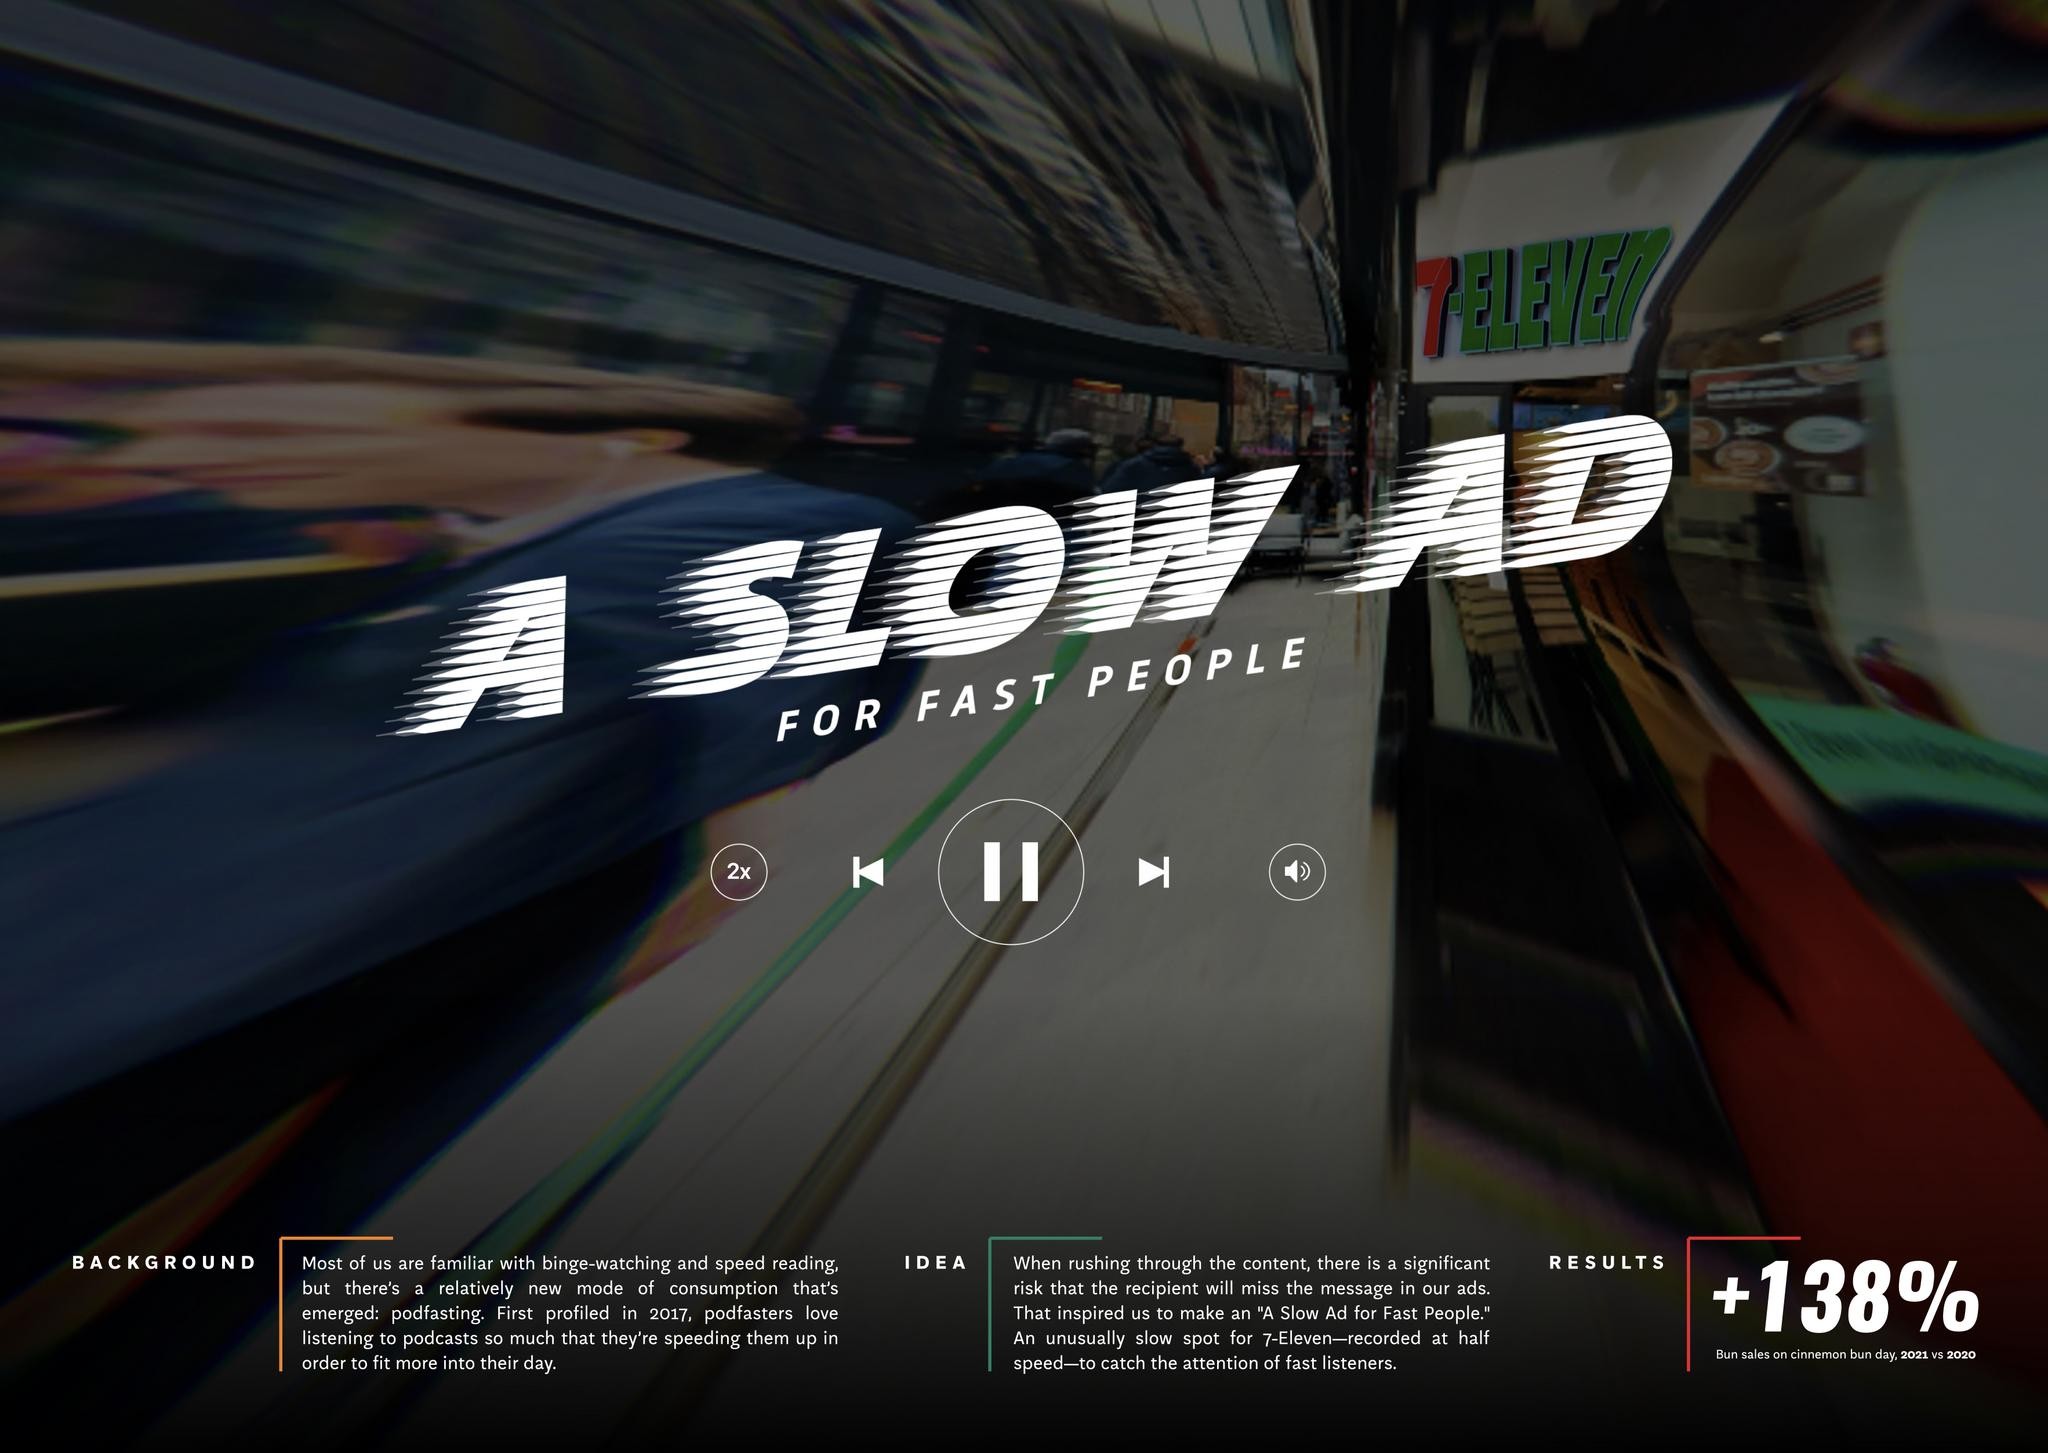 A SLOW AD FOR FAST PEOPLE